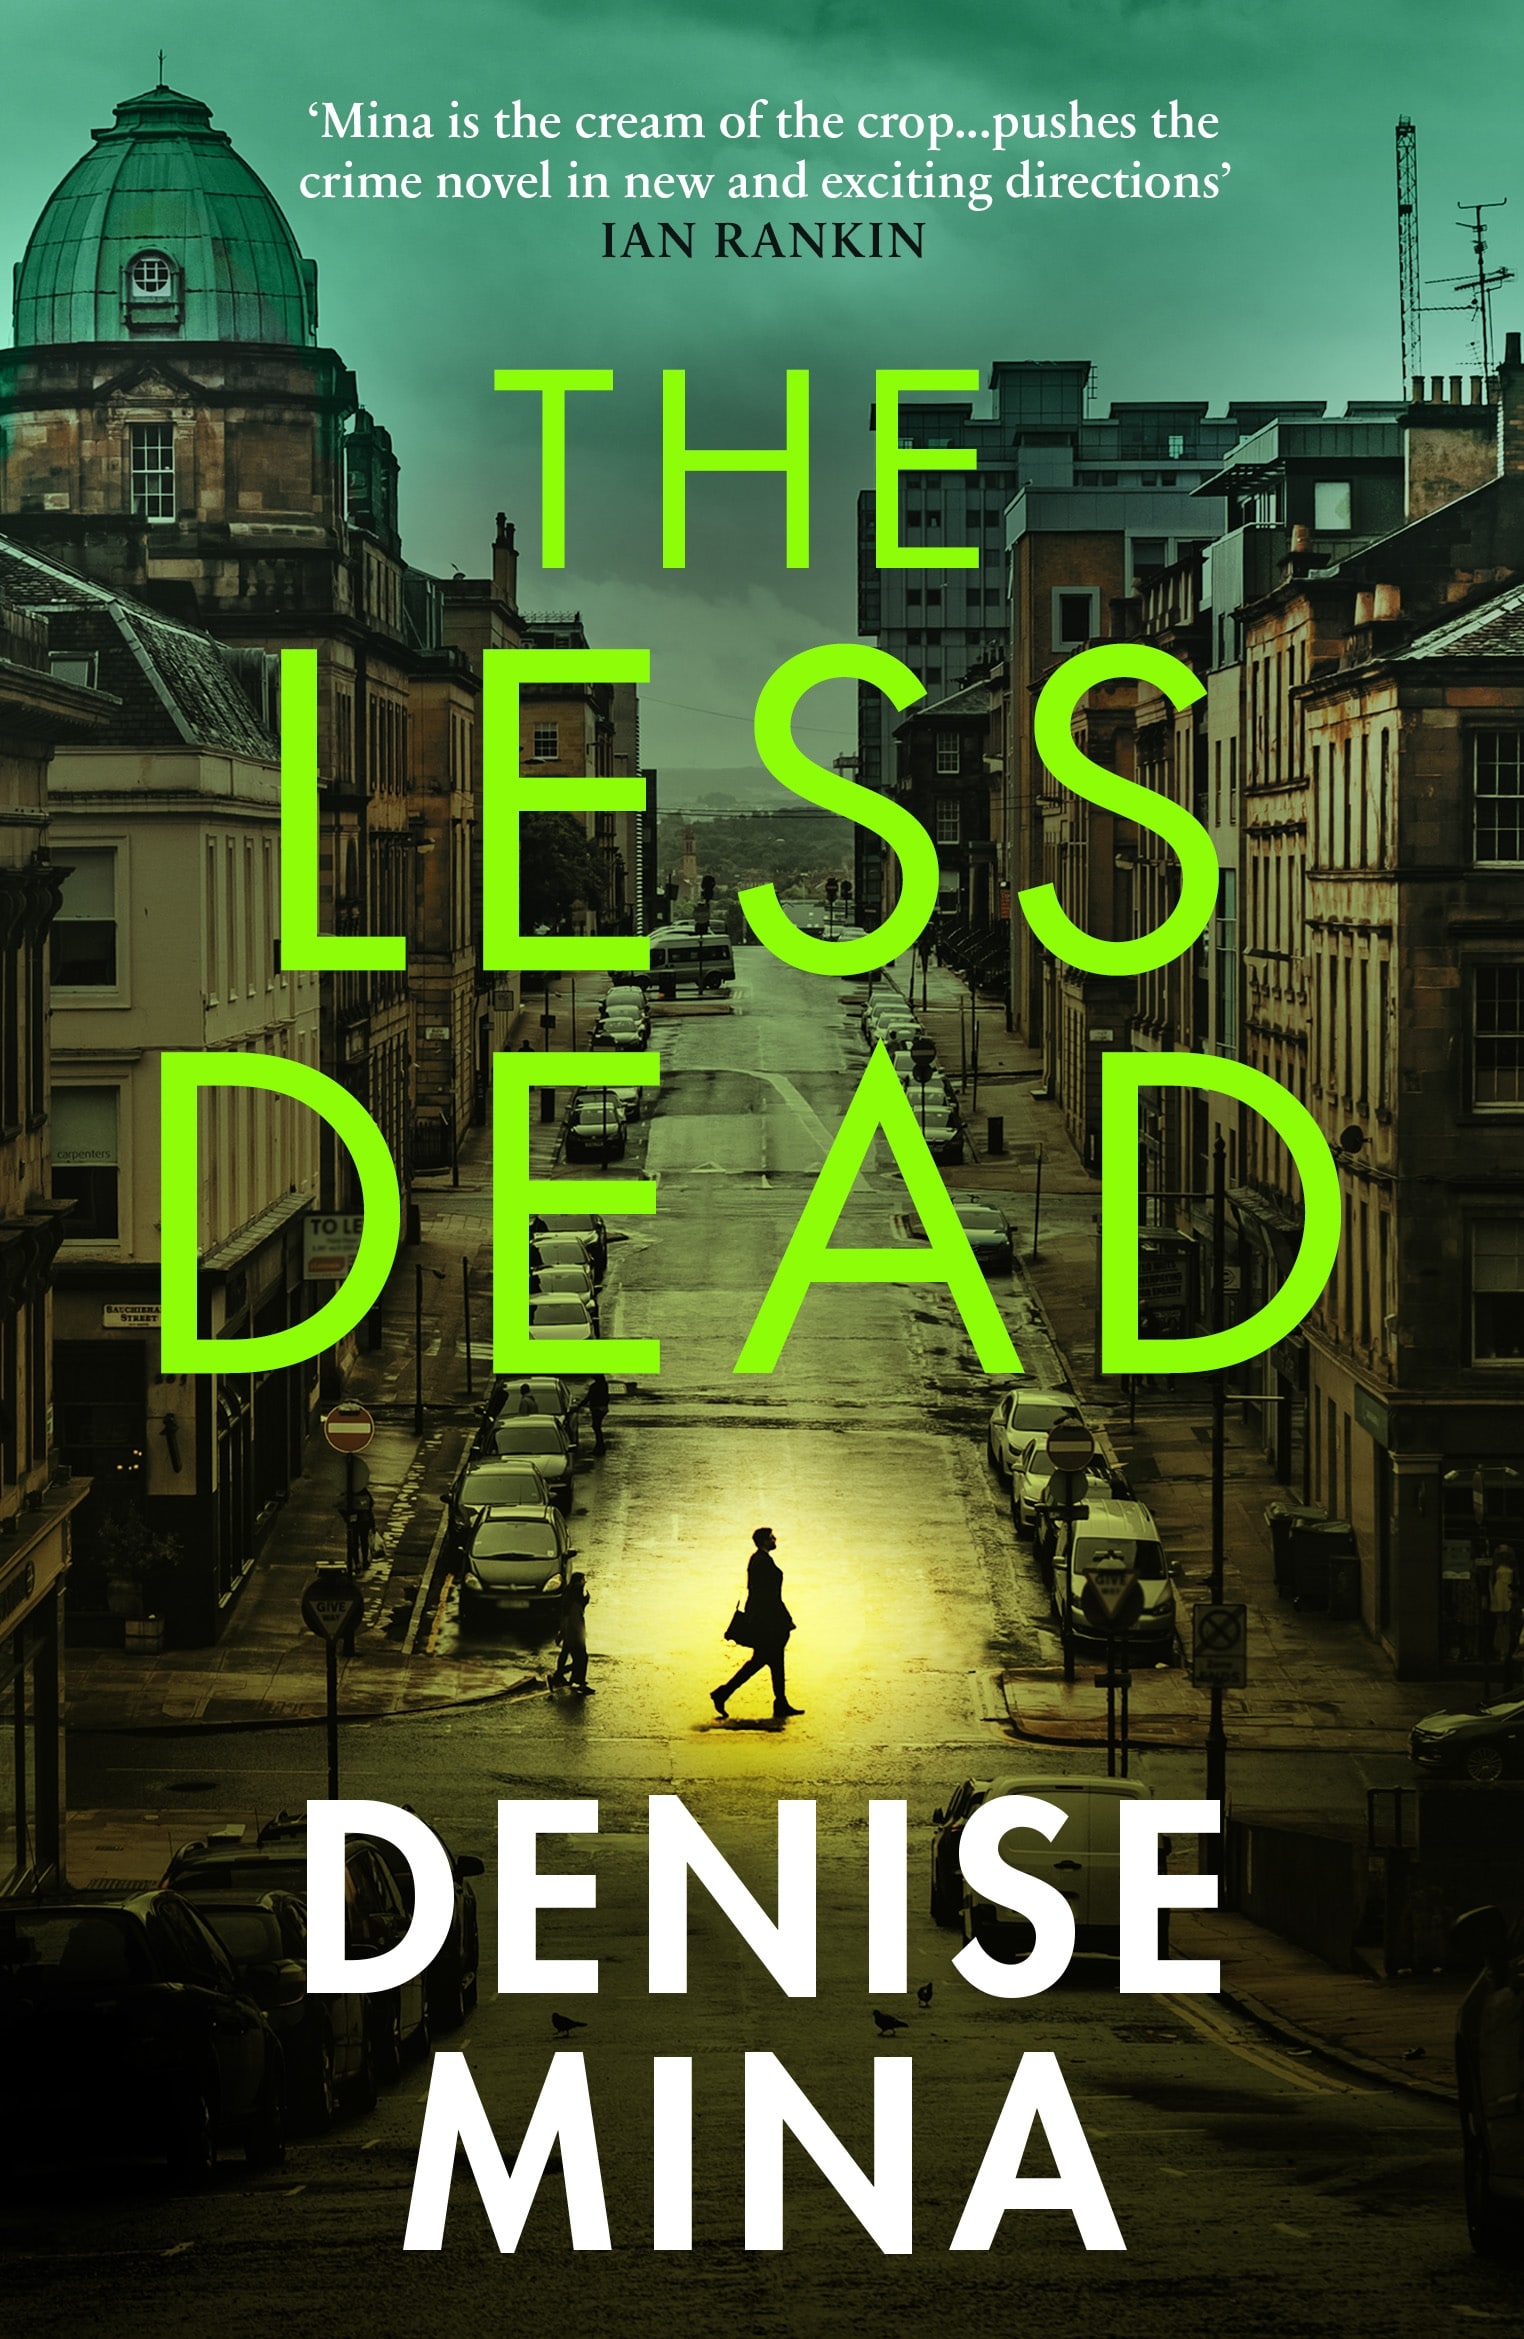 Book jacket of The Less Dead by Denise Mina